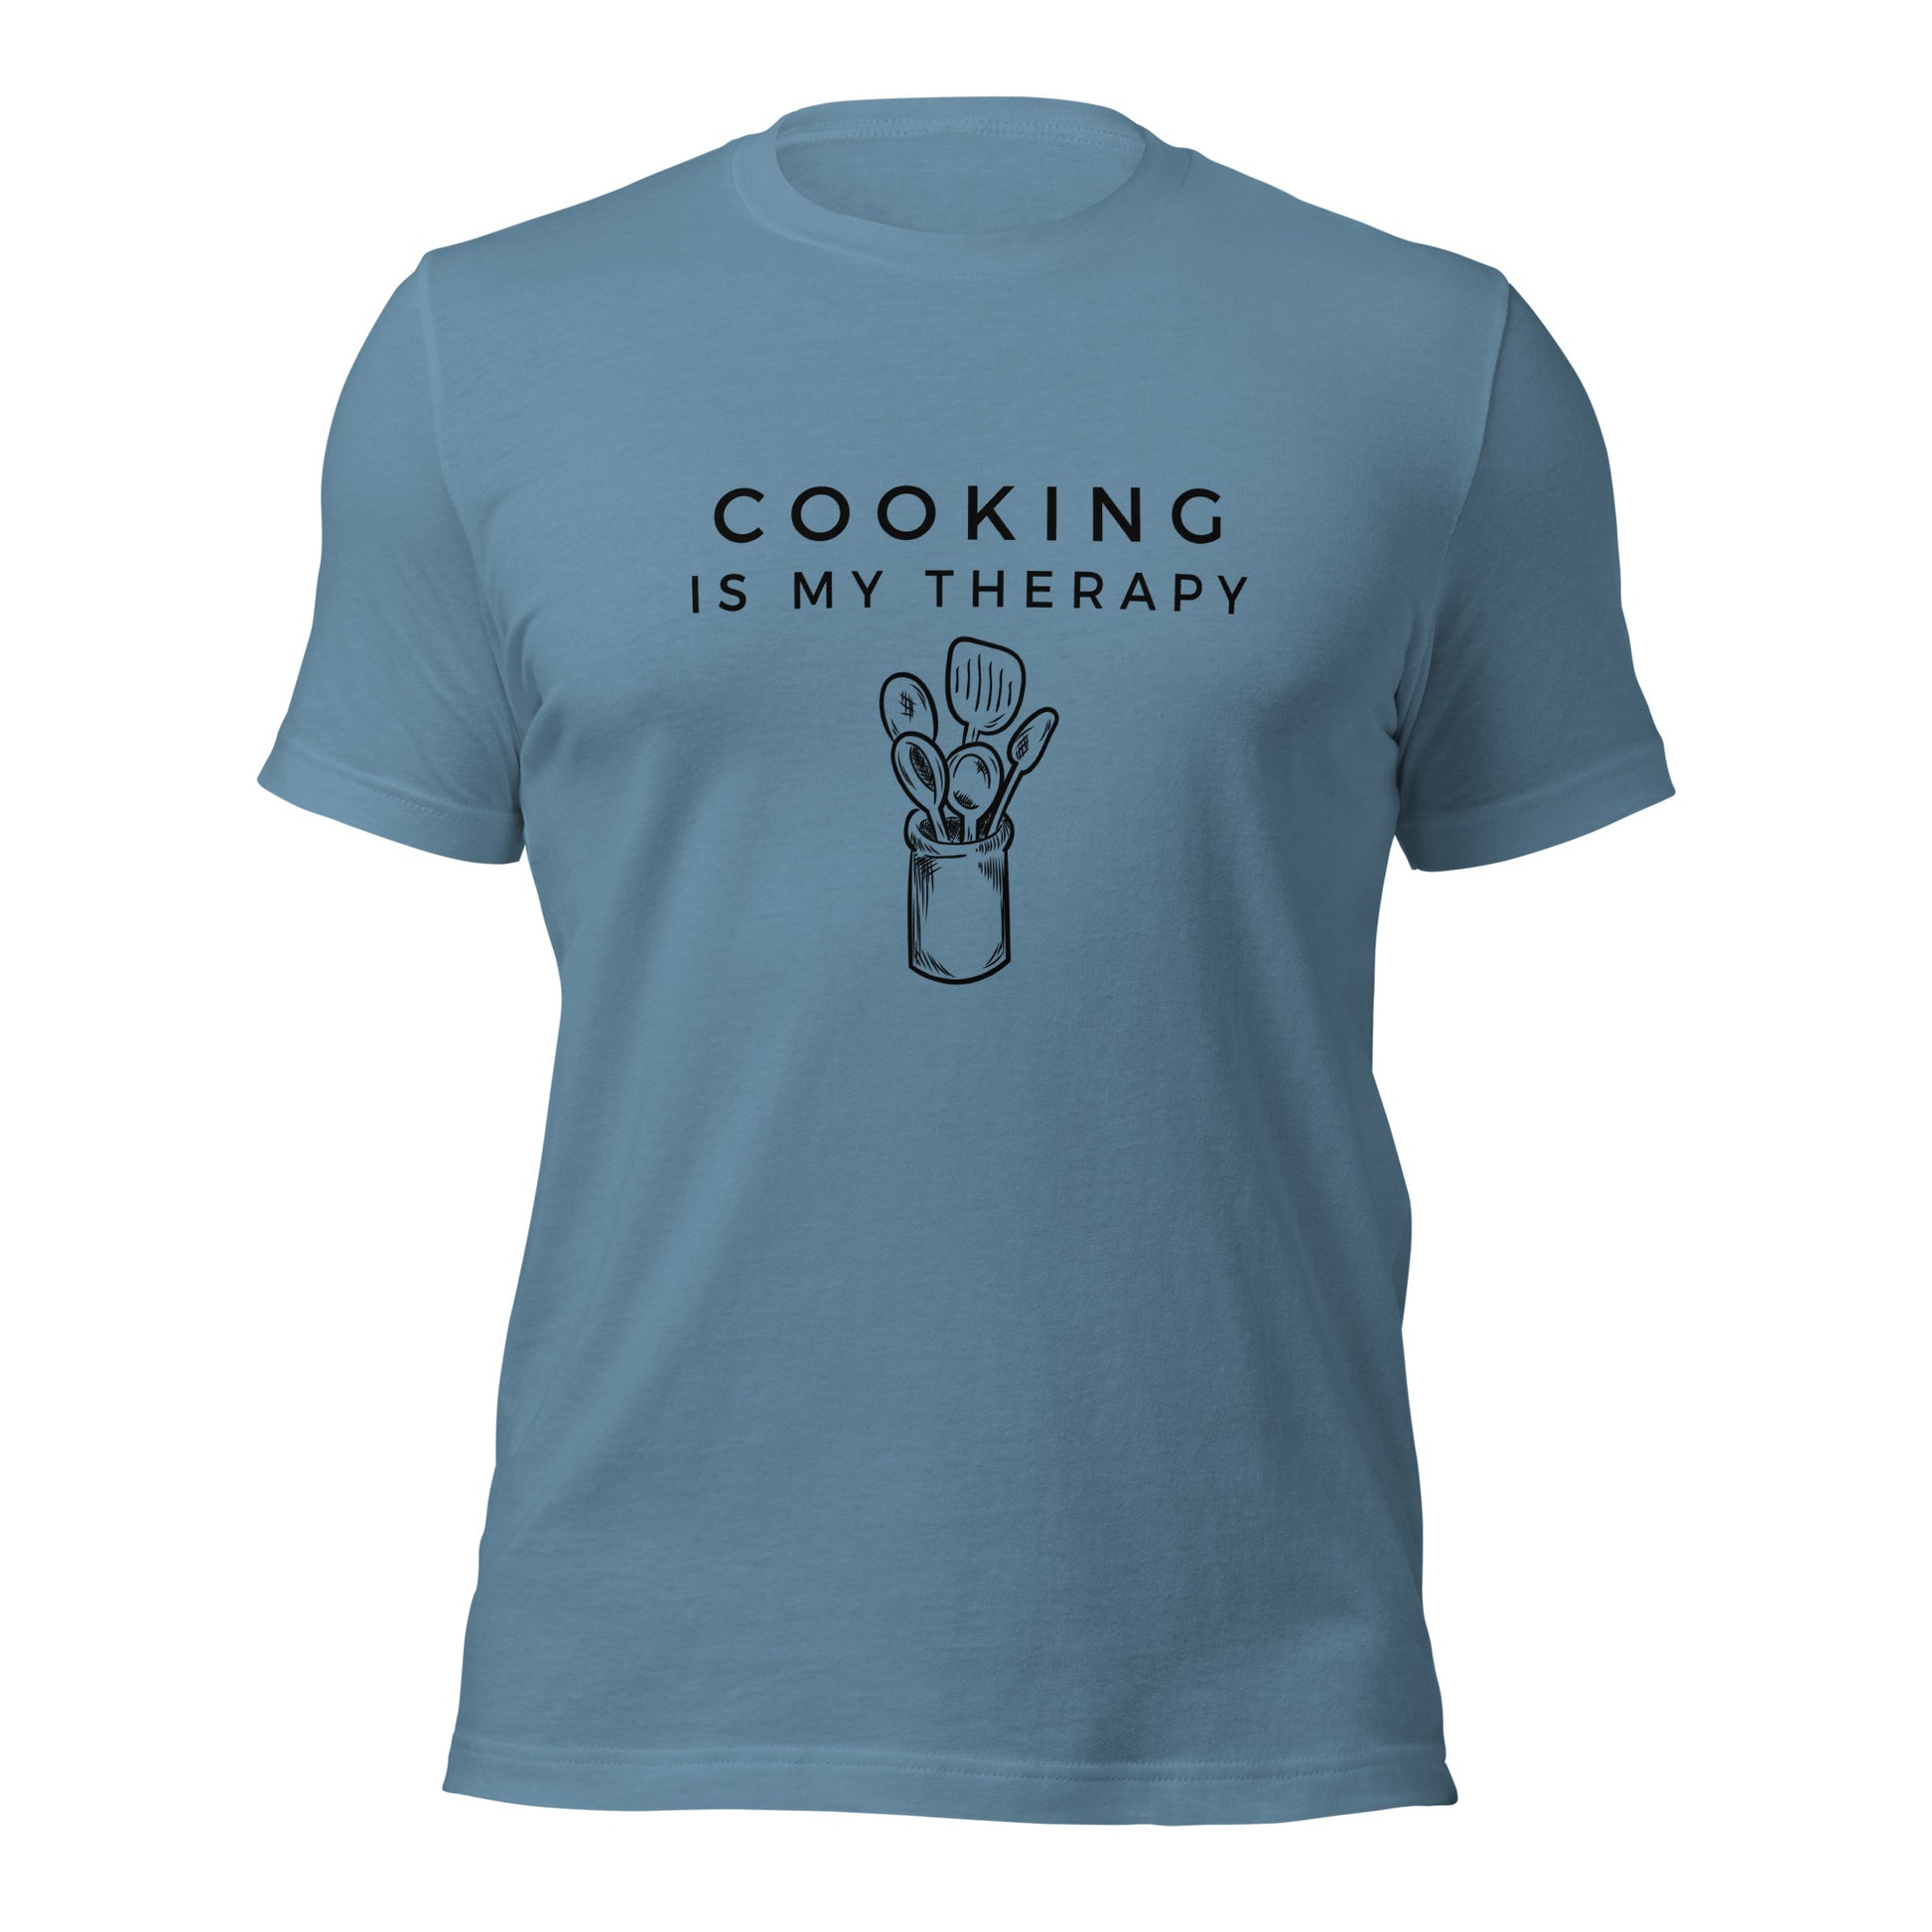 Comfortable cooking-themed t-shirt for all-day wear